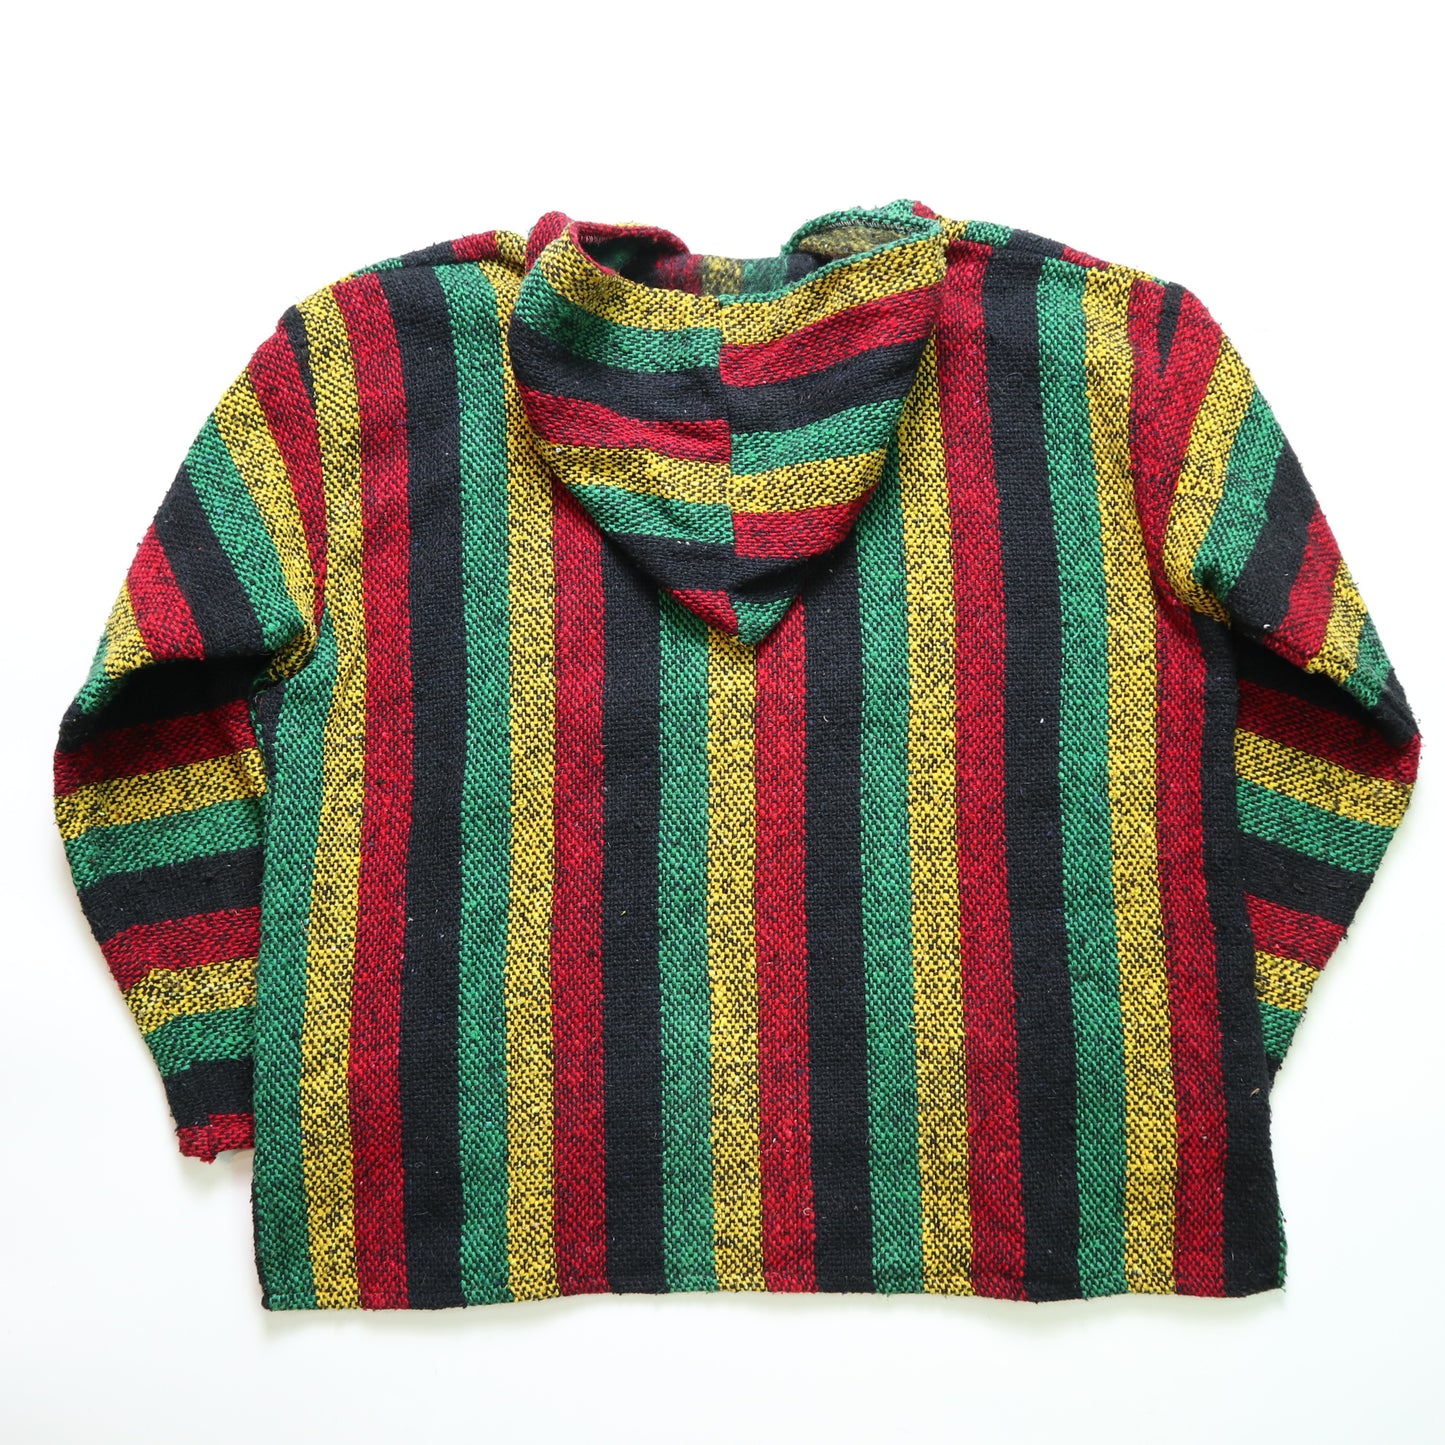 Colorful Mexican Cover-Up Mexican Hooded Top